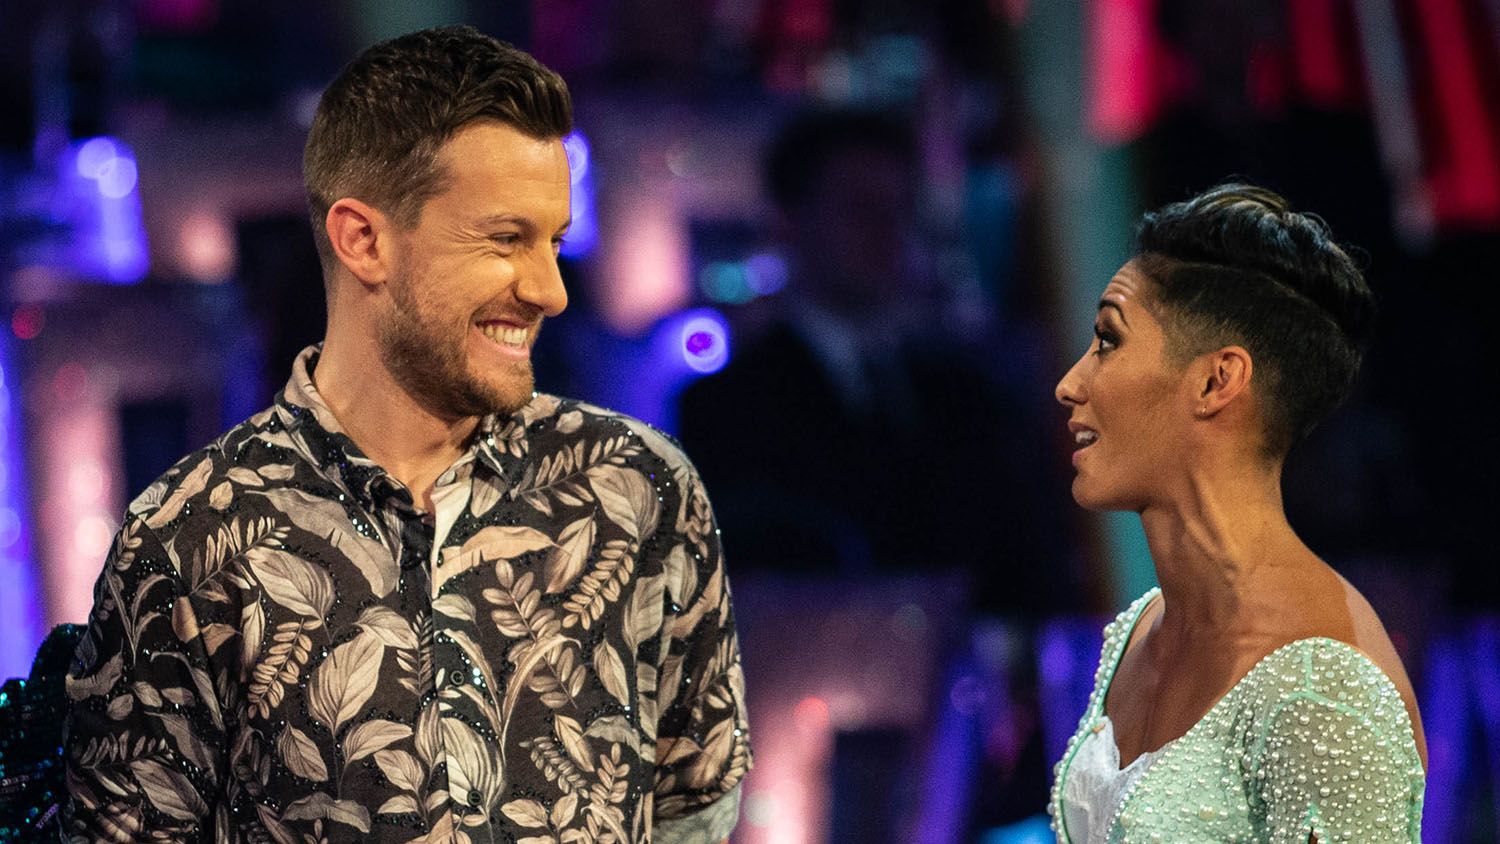 Strictly Come Dancing 2019 Chris Ramsey And Karen Hauer Out In The Semi Final